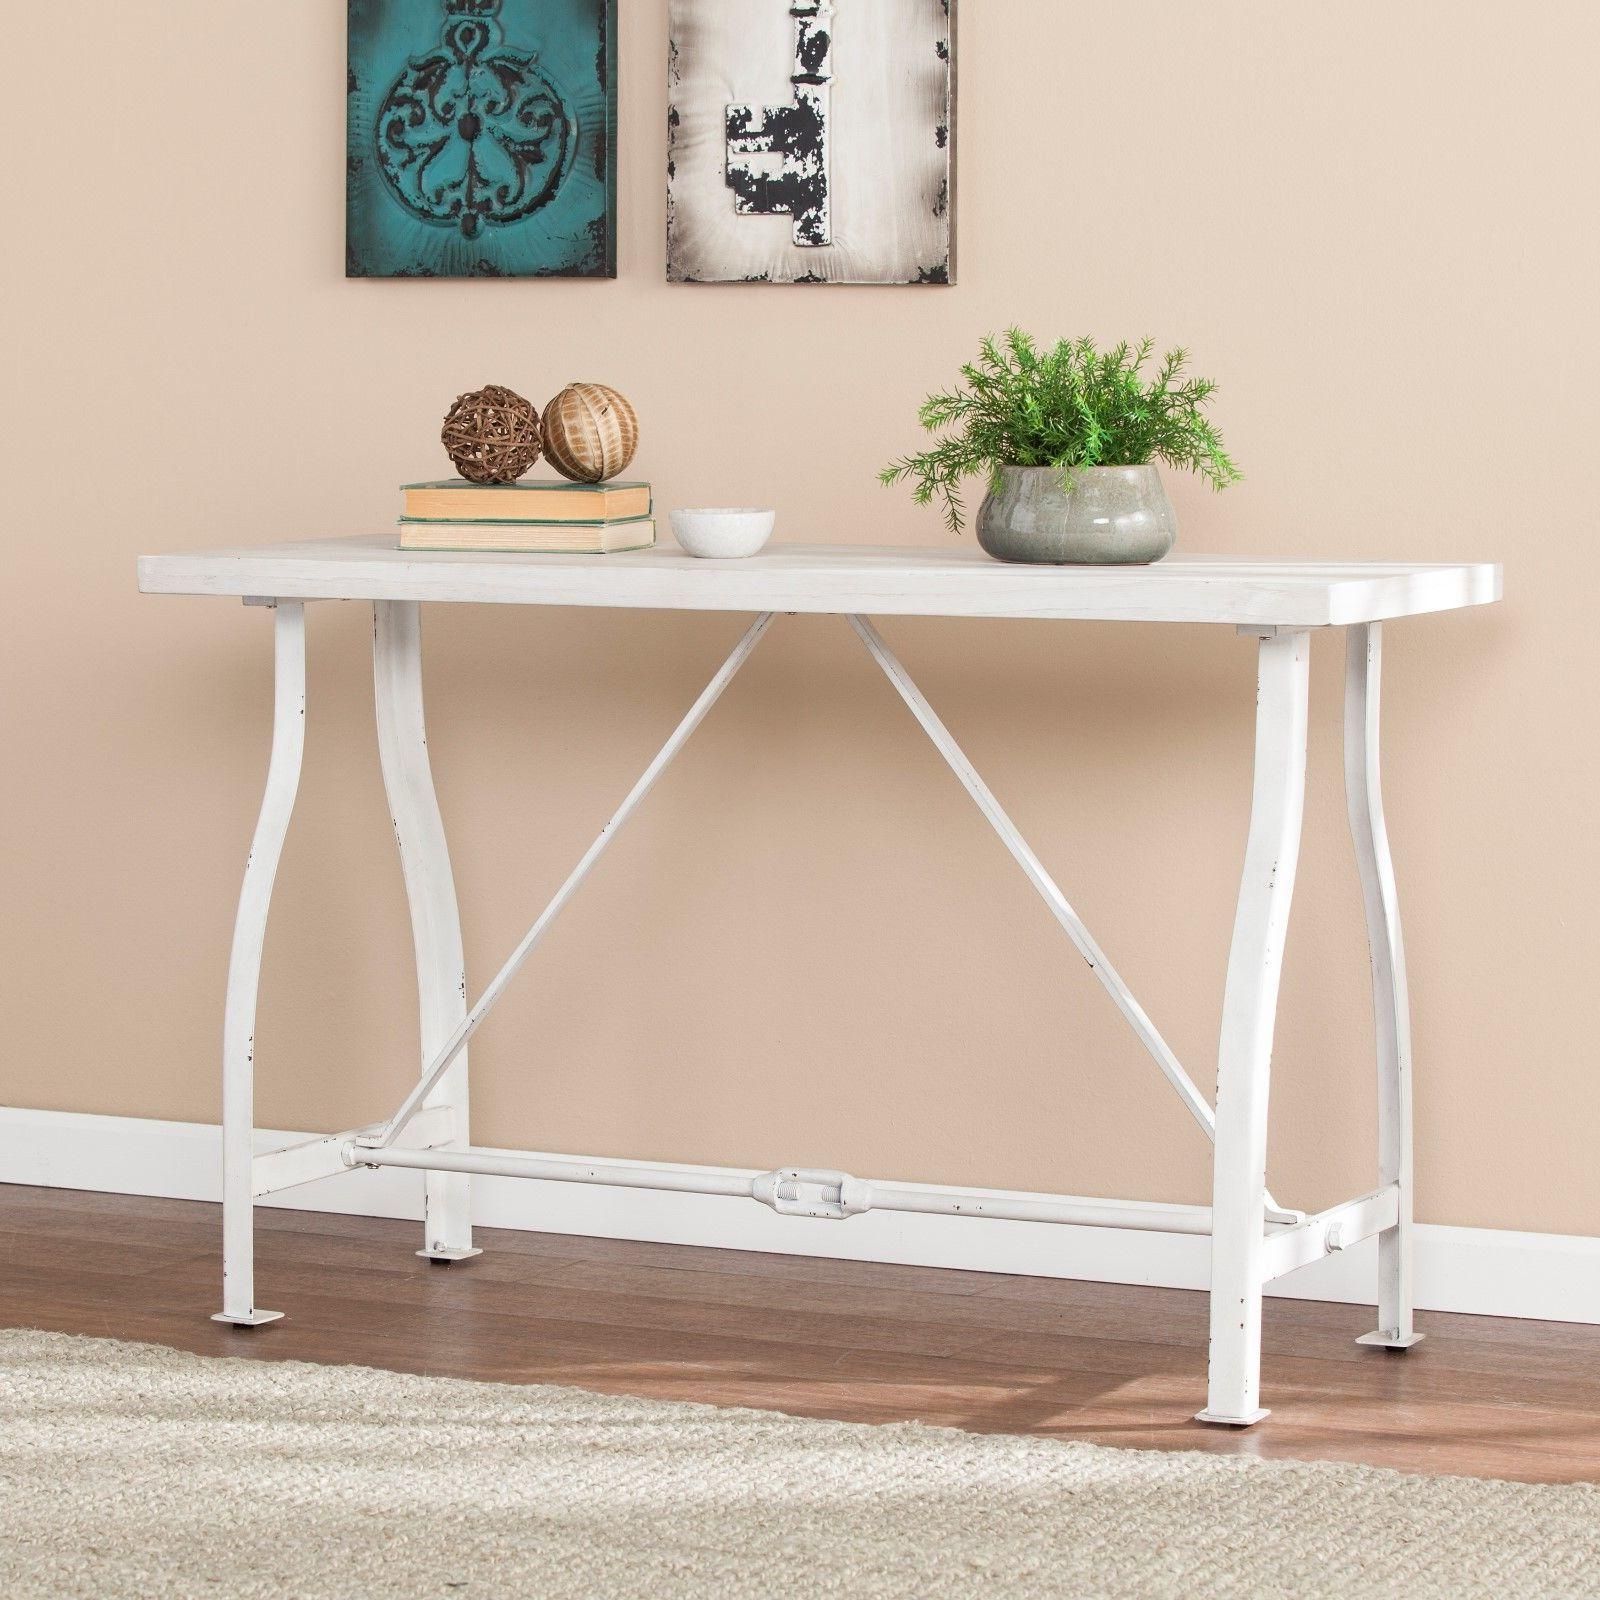 Cst45901 Farmhouse Style Console Table – Distressed White Regarding Modern Farmhouse Console Tables (View 12 of 20)